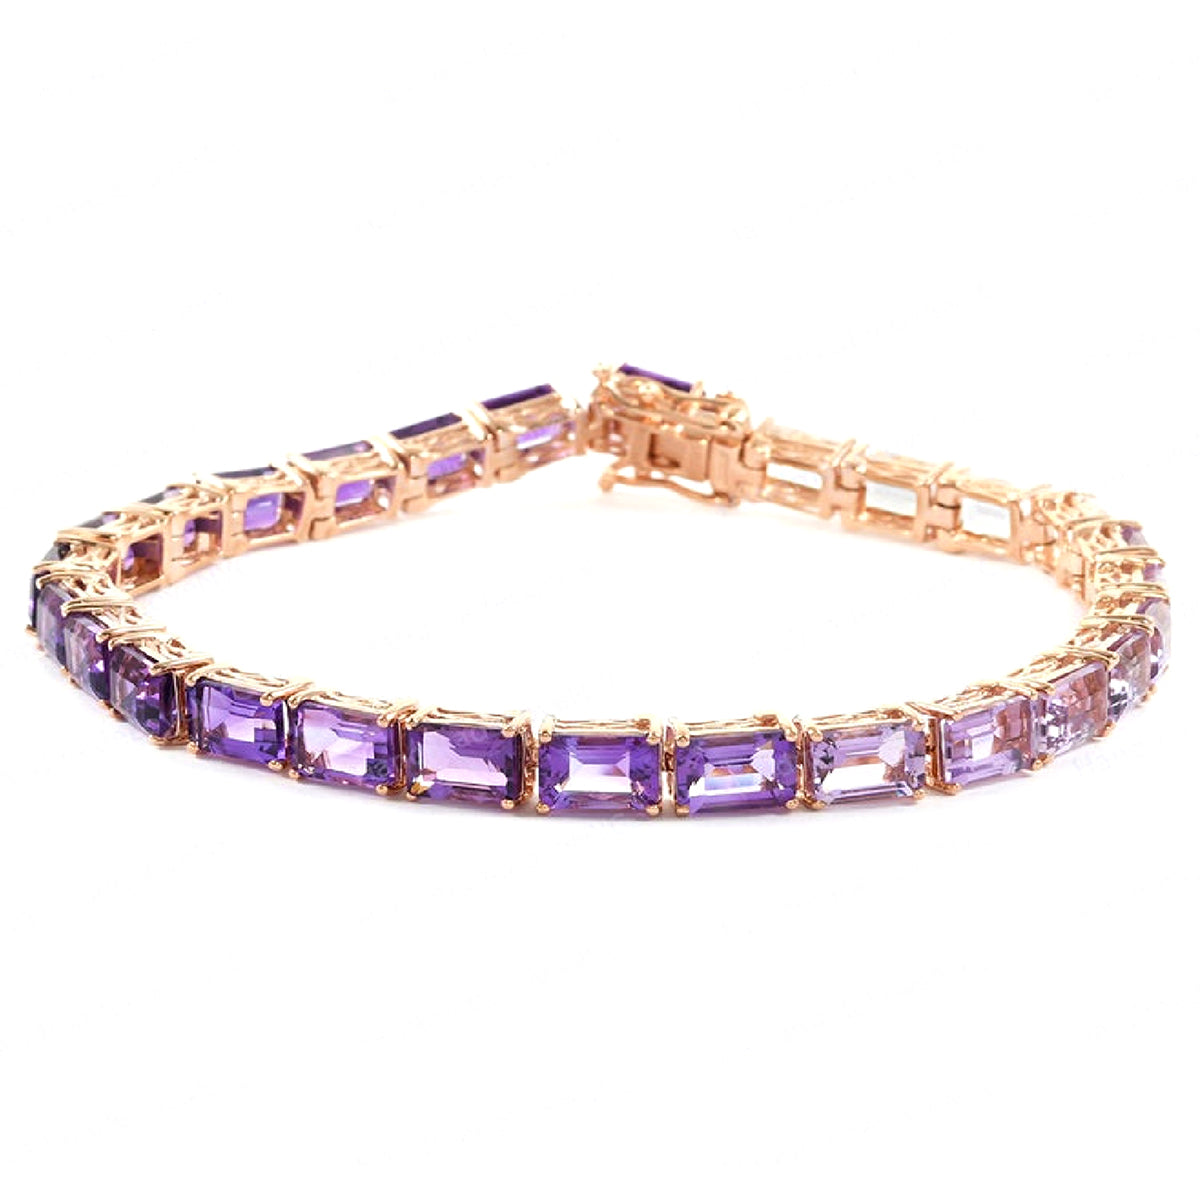 Amethyst Crystal Jewelry, Rough Crystal, Gold Bangle Bracelet, Gift for Her  | Amethyst crystal jewelry, Gold bangle bracelet, Gold bangles